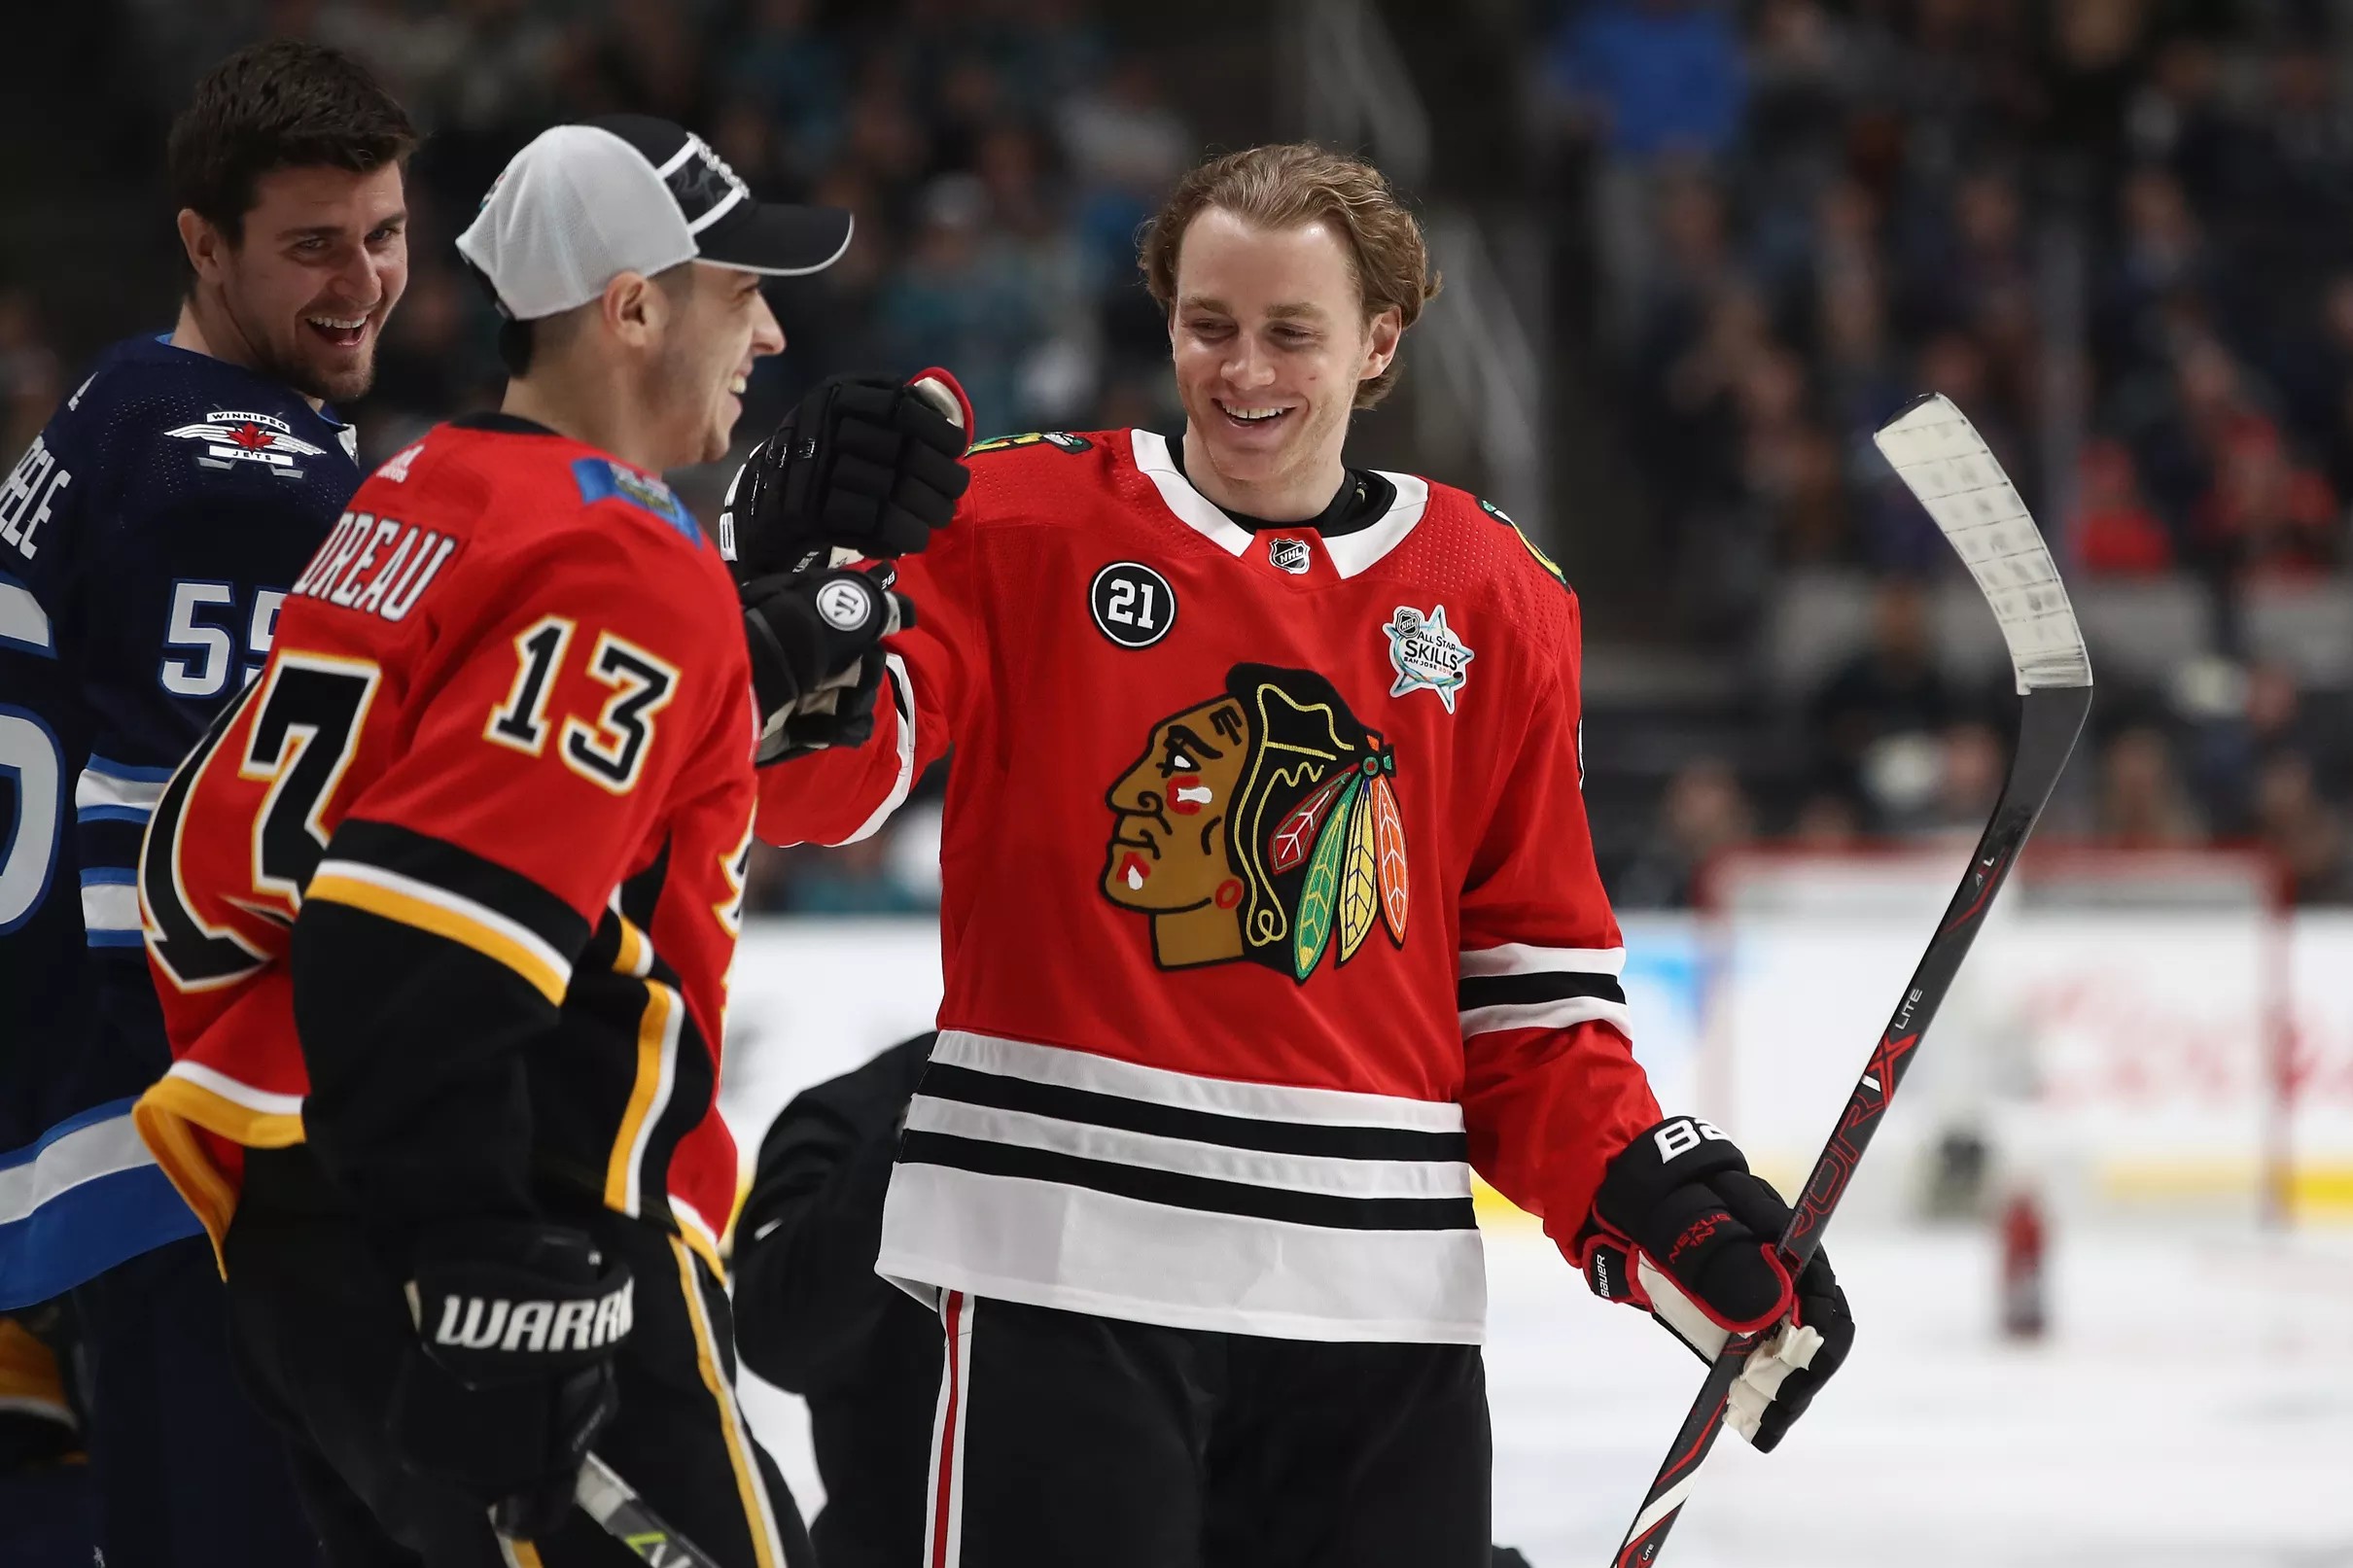 2019 NHL All-Star Game: Rosters, how to watch on TV and online